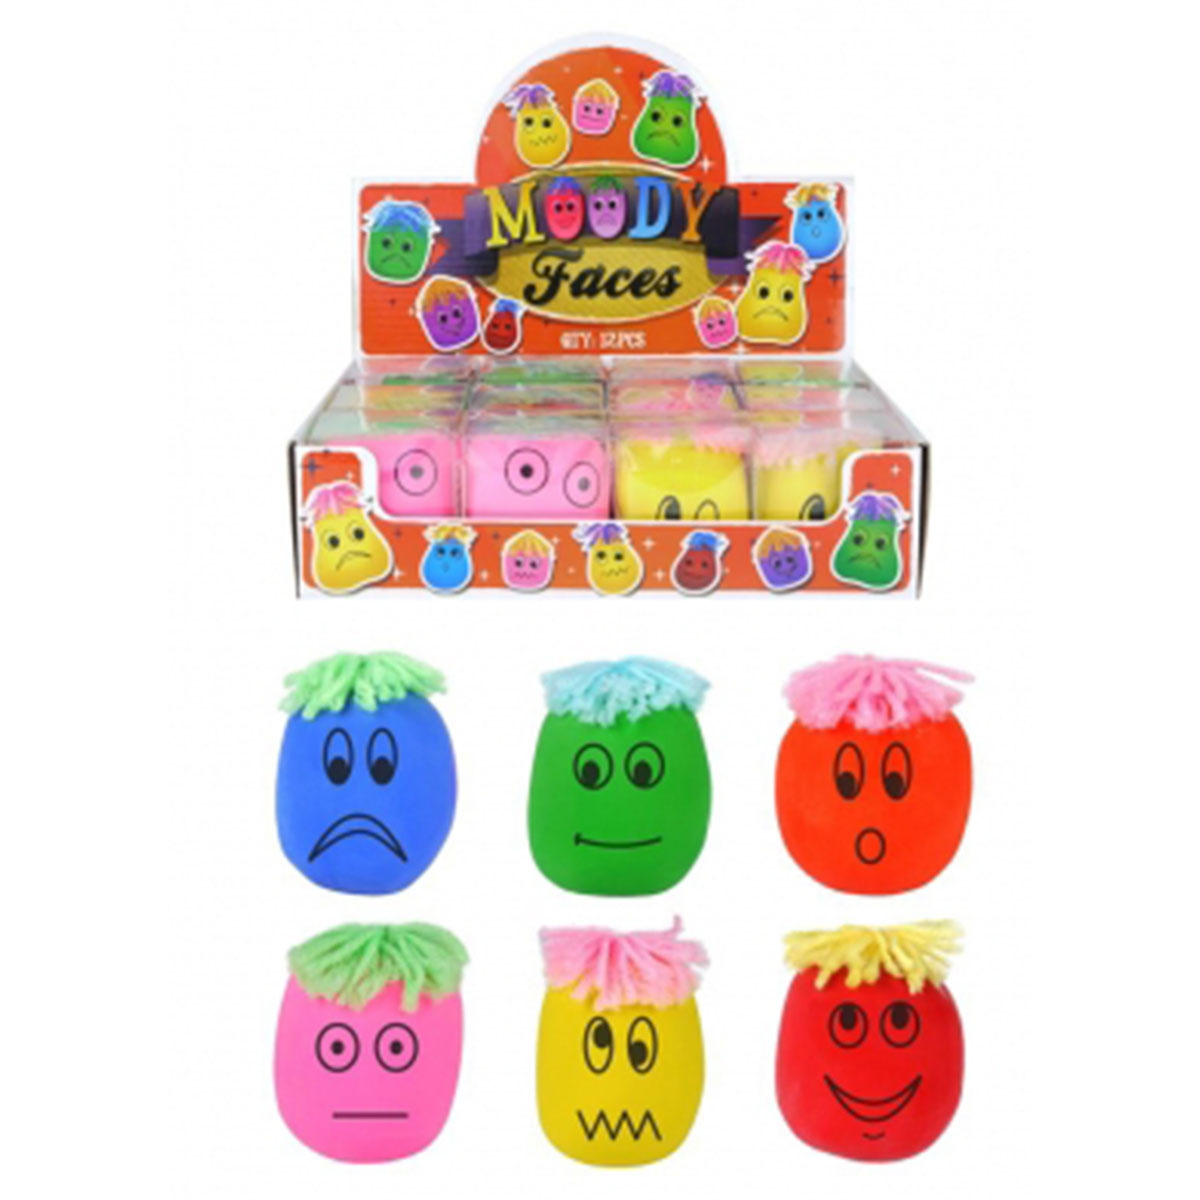 Moody - Face Squeeze Squishy Toy - 6cm - Continental Food Store